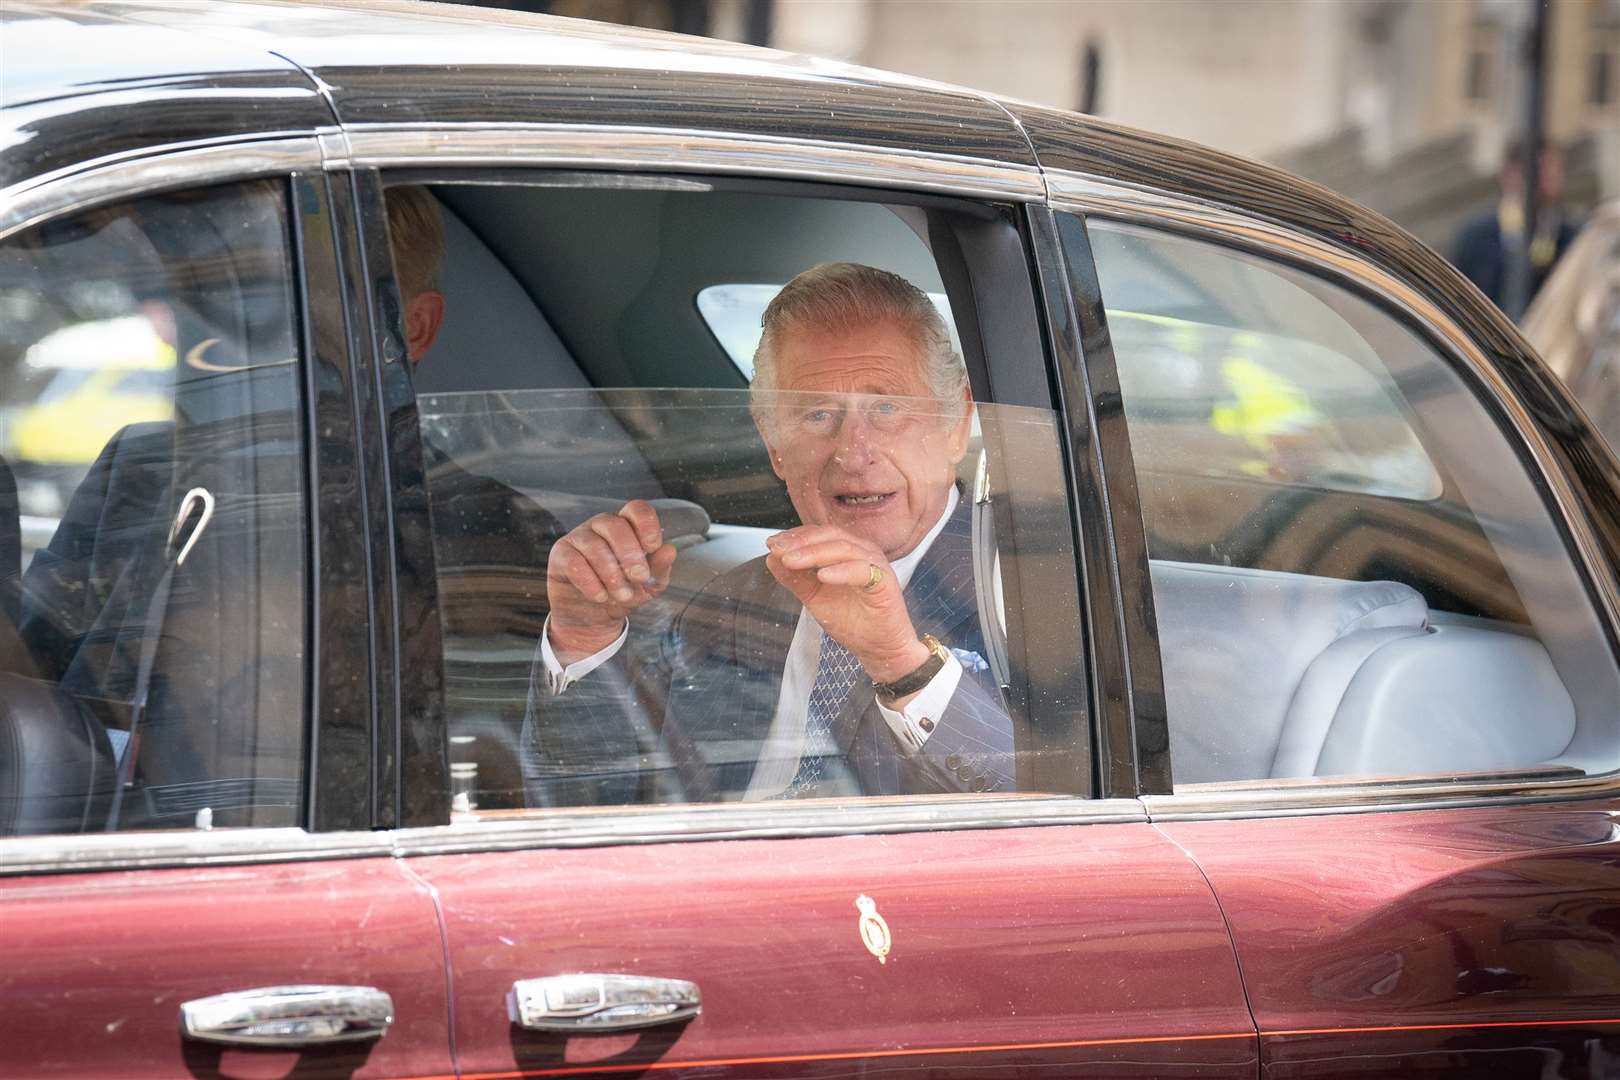 Charles leaving Westminster Abbey in central London on Wednesday after a rehearsal for his coronation (PA)